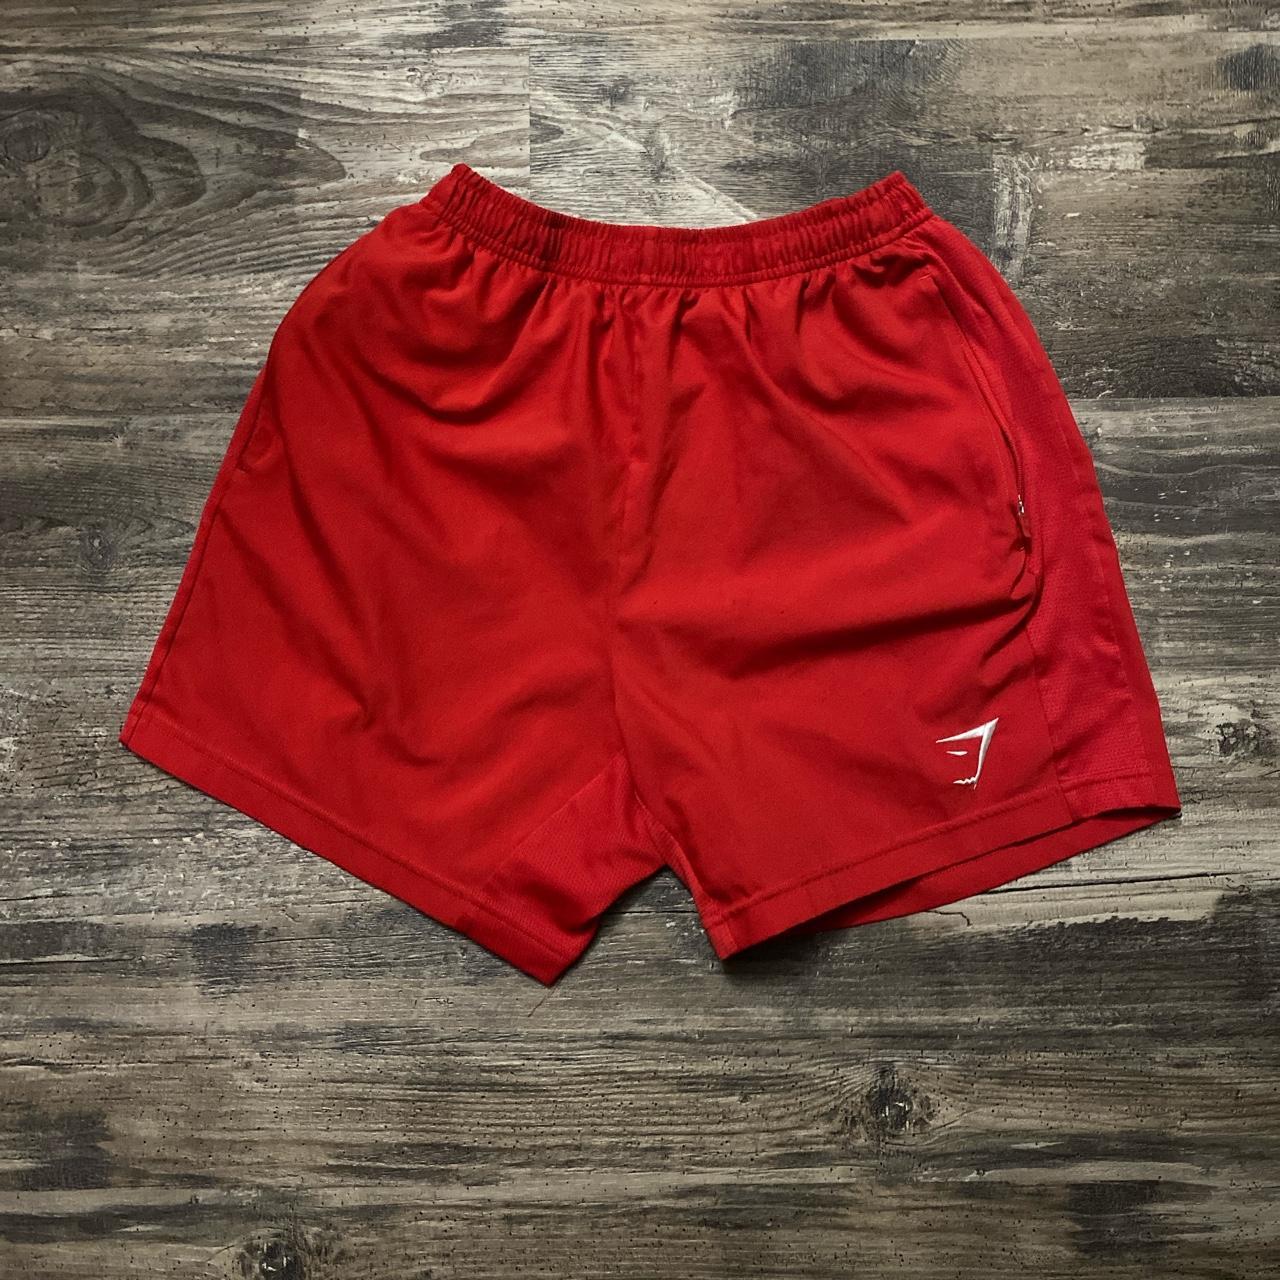 Men's Red and White Shorts | Depop